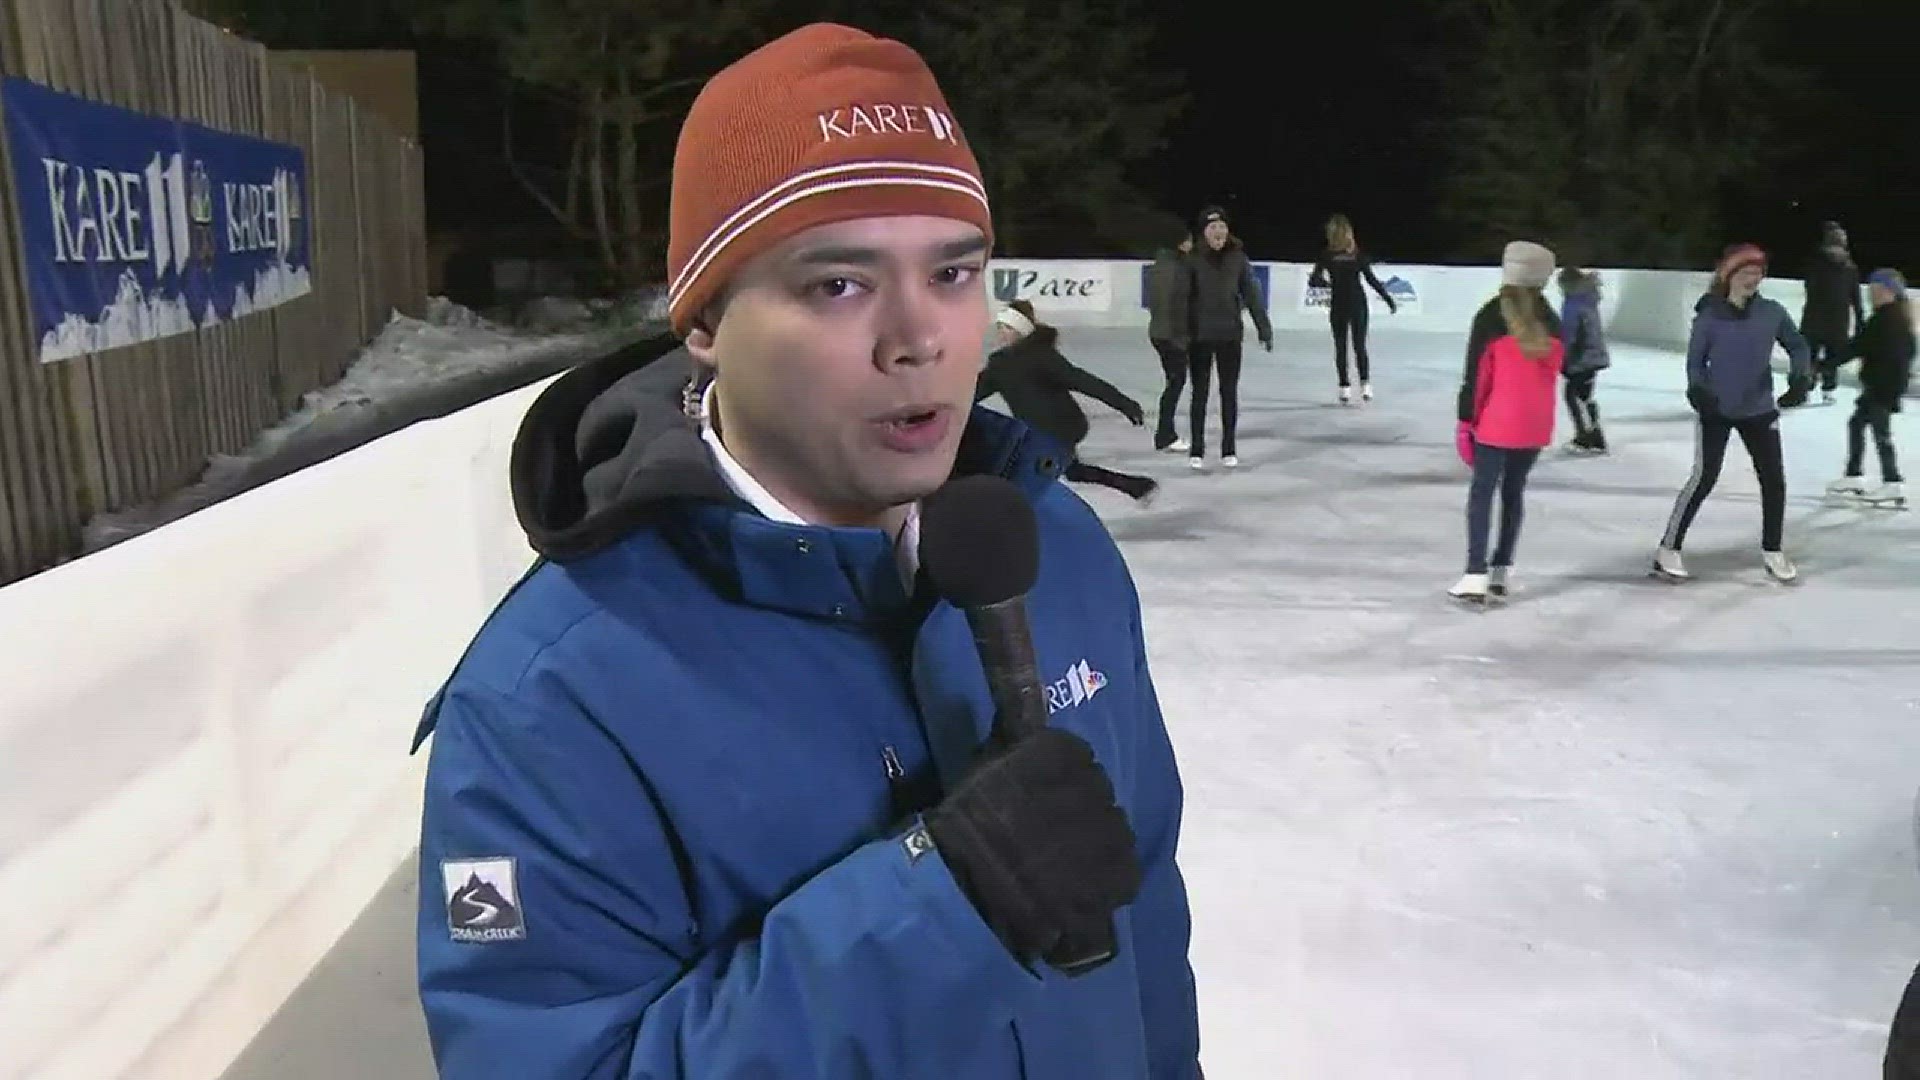 Members of the Three Rivers Figure Skating Club woke up bright and early to visit the UCare Ice Rink on KARE 11 Sunrise.  http://kare11.tv/2FeqtUV